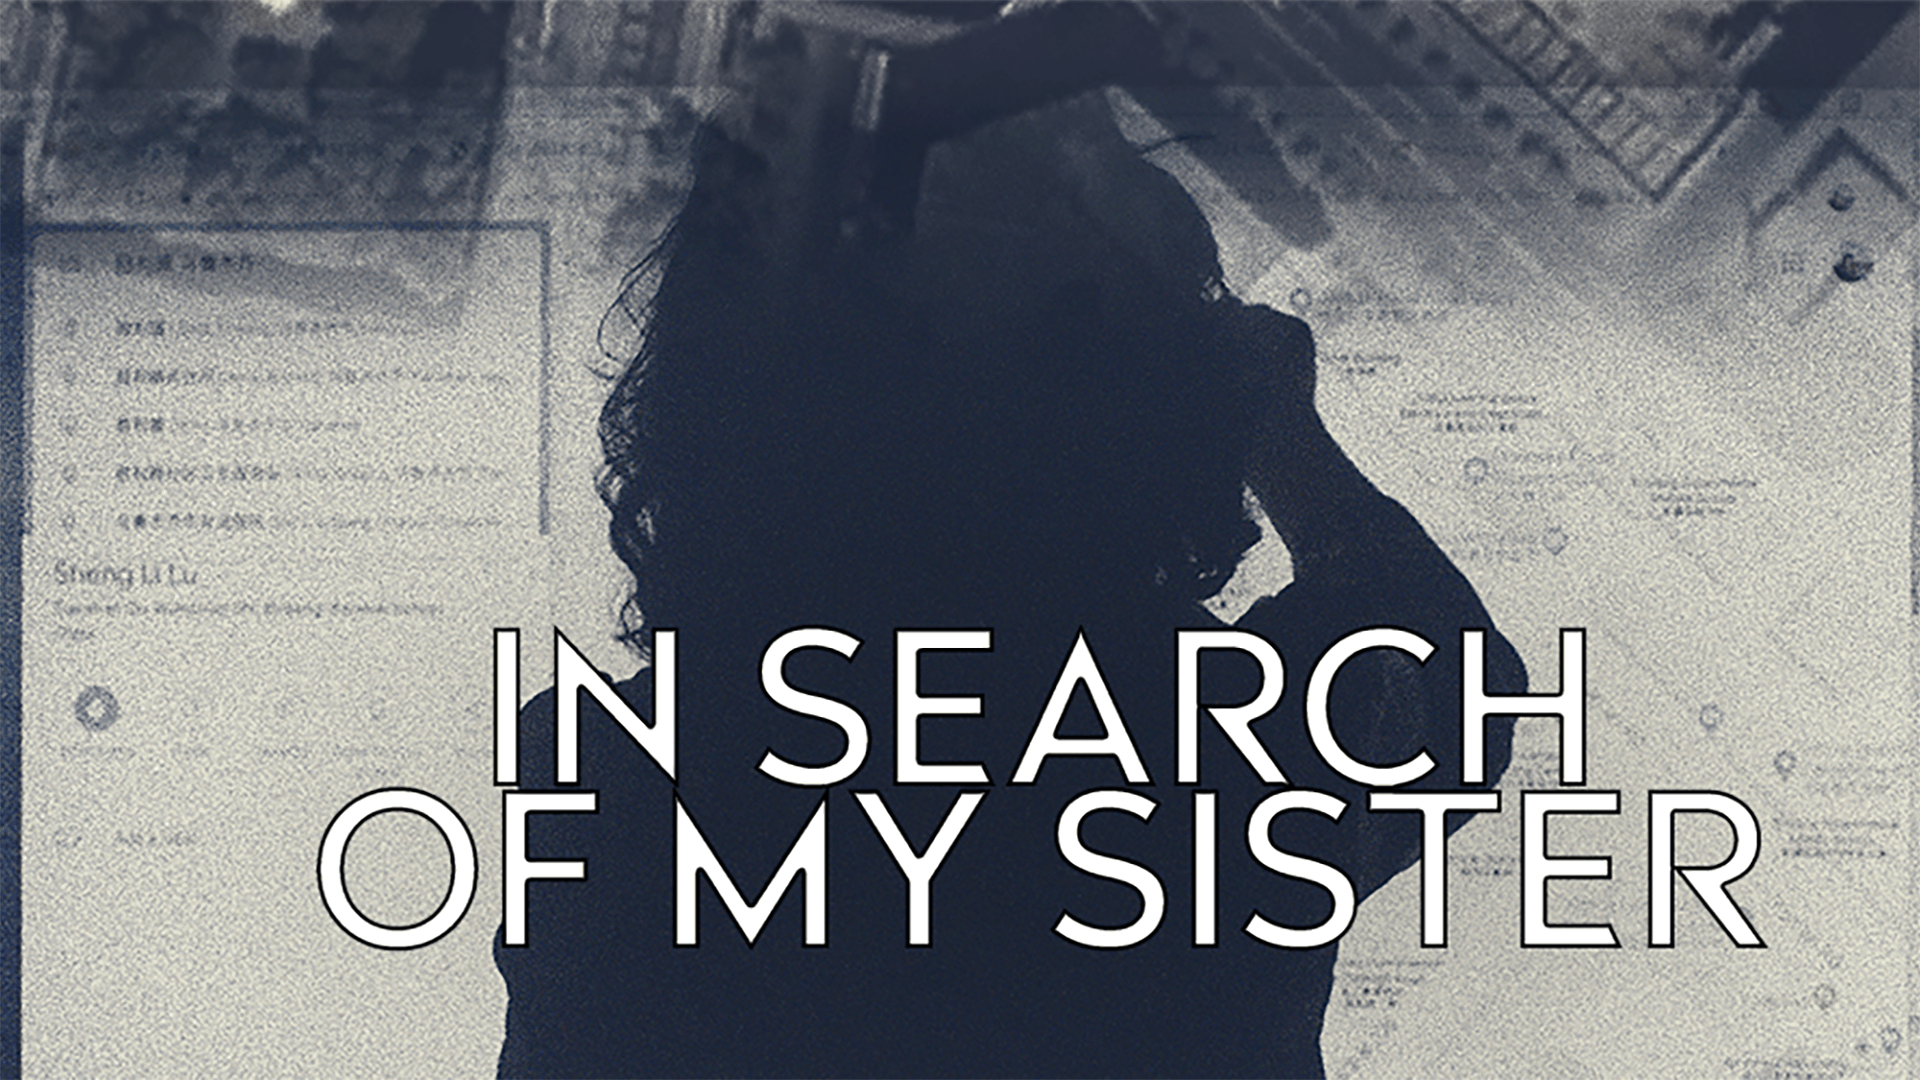 In Search of My Sister